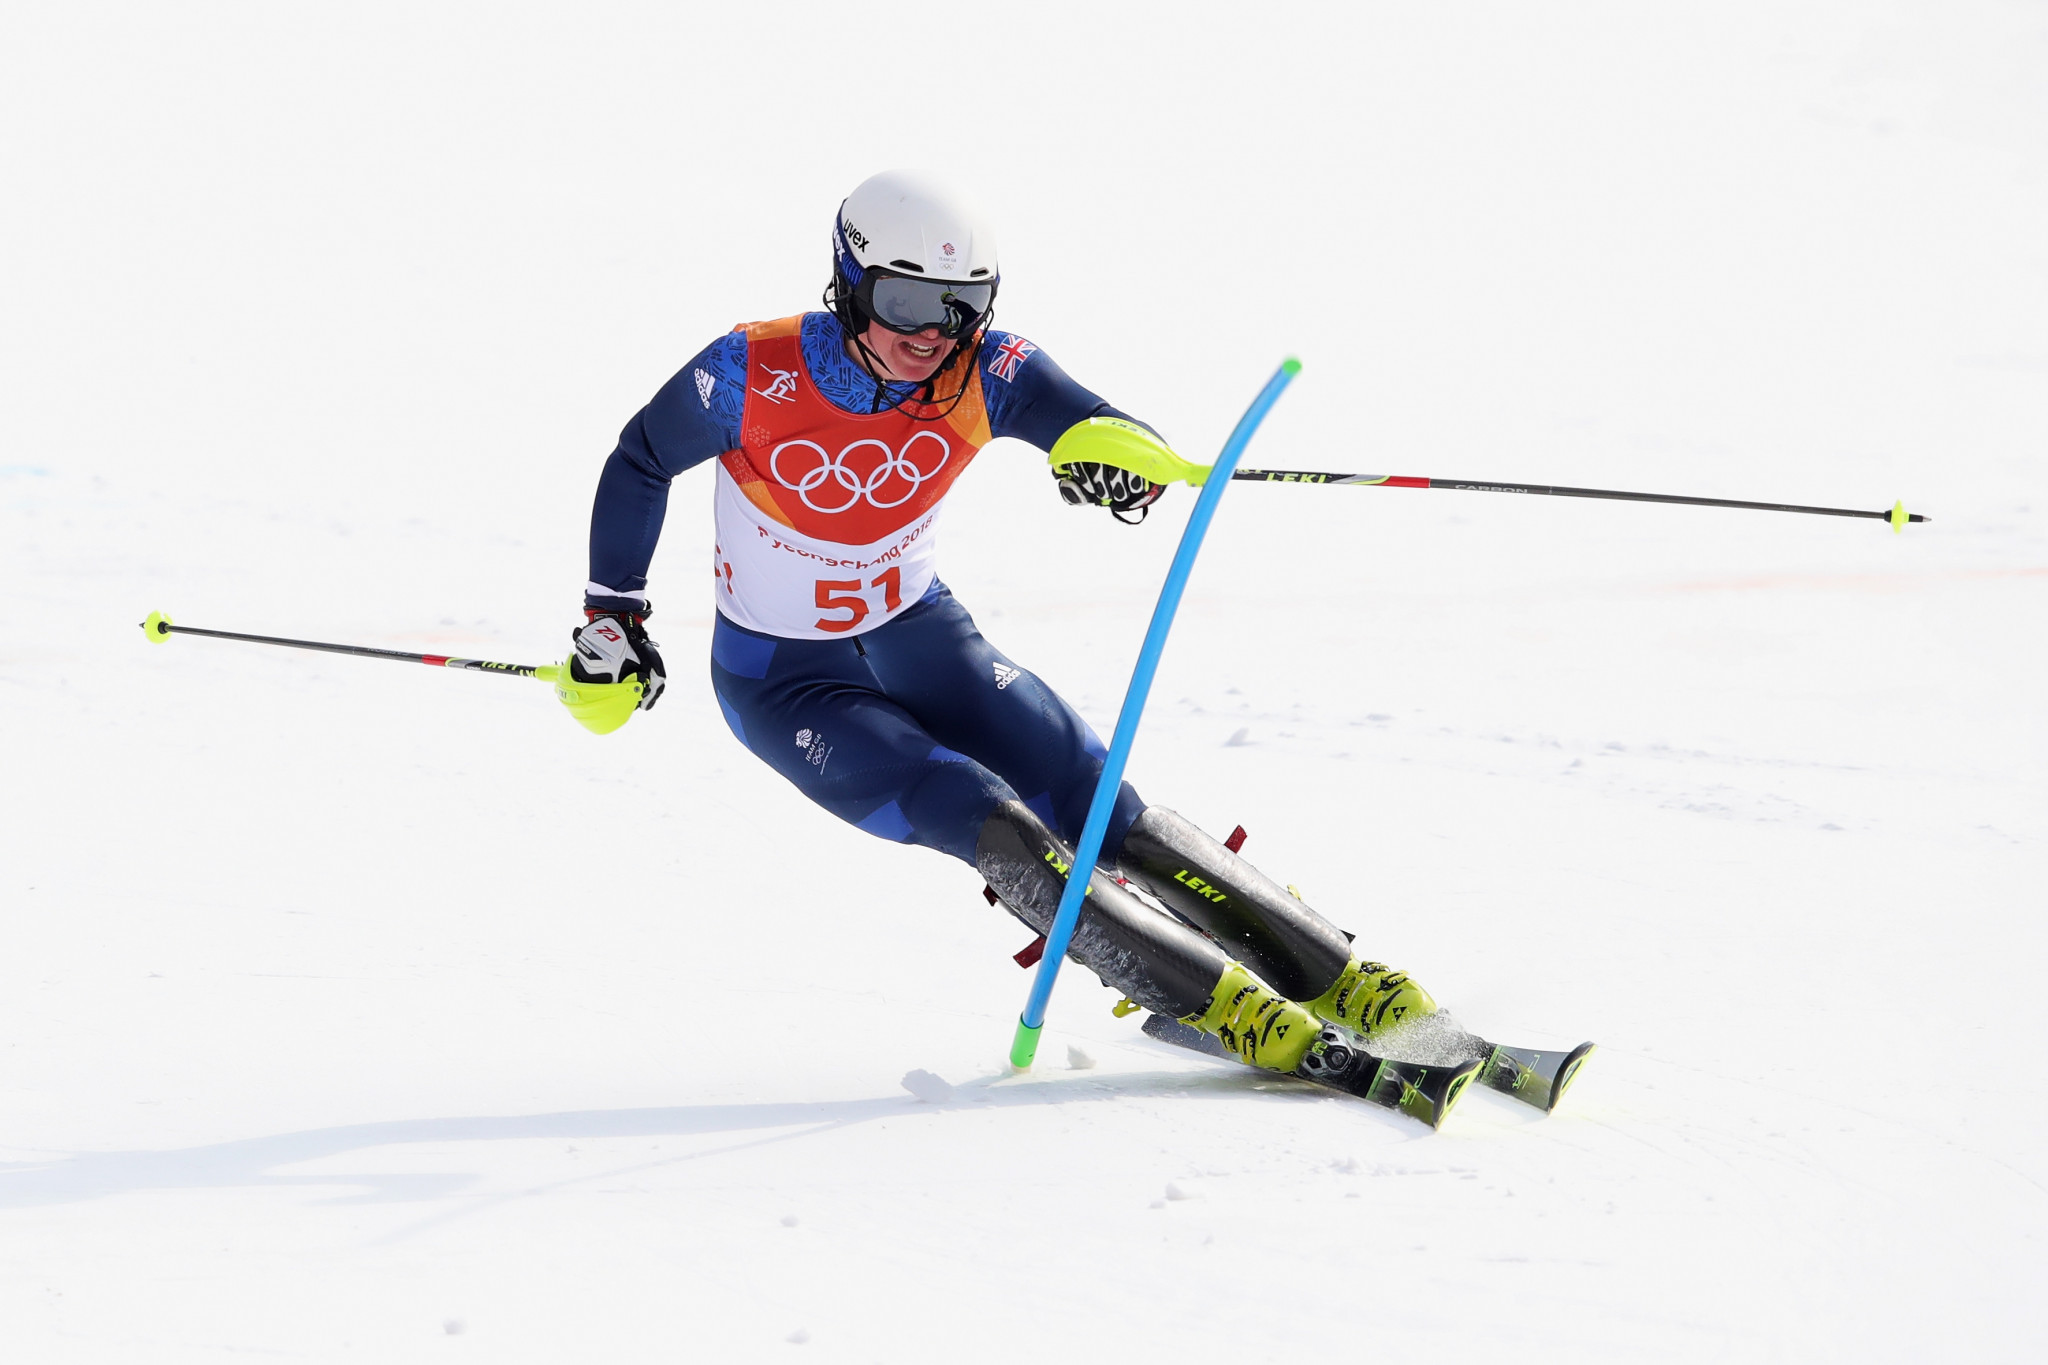 Live timing and results from all FIS events will be available ©Getty Images